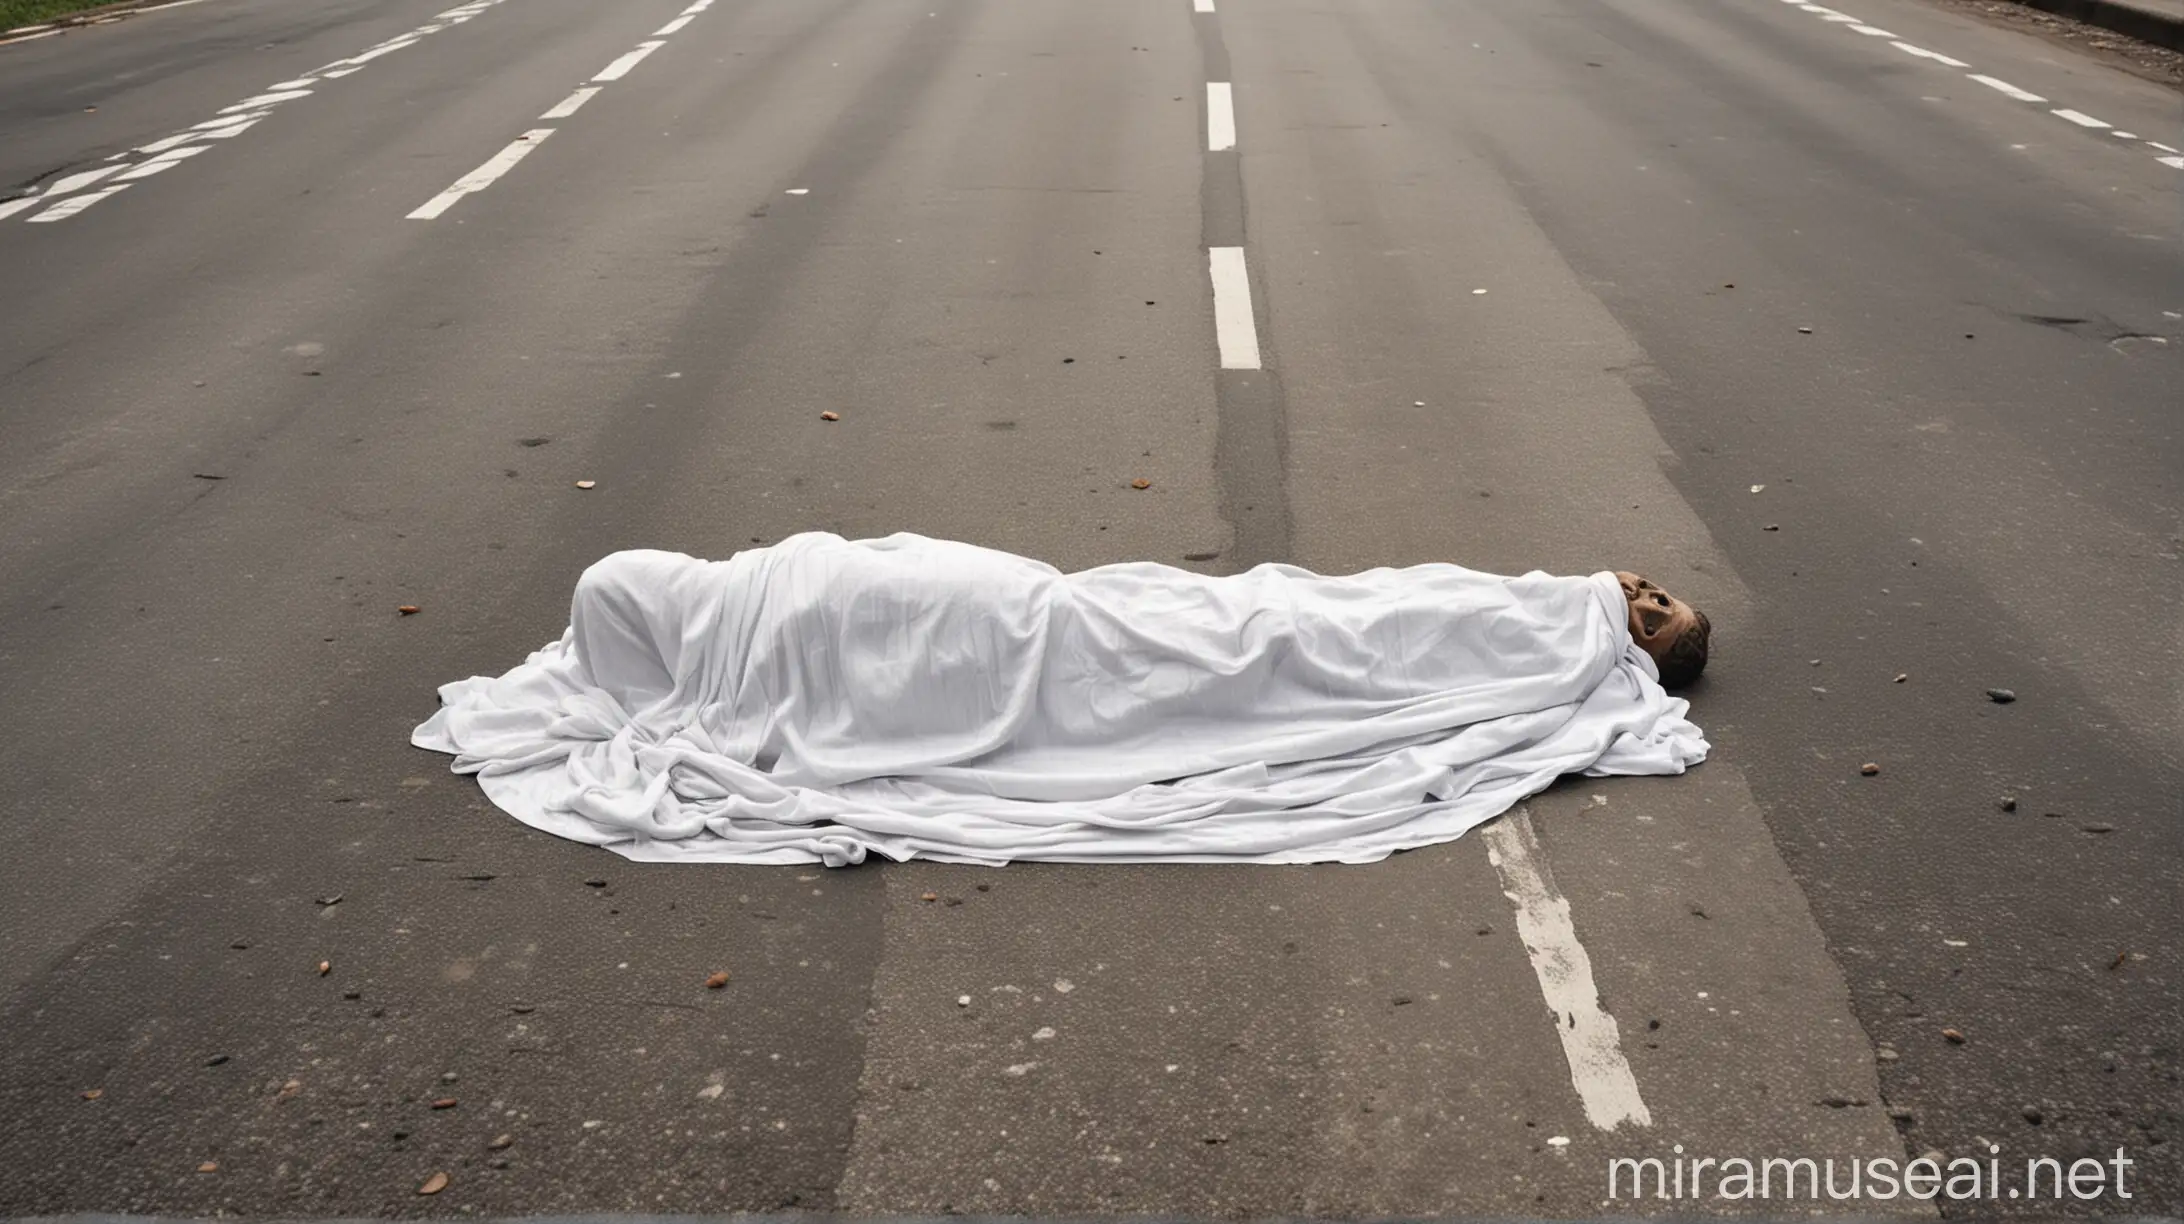 Fatal Road Accident Scene with Covered Body